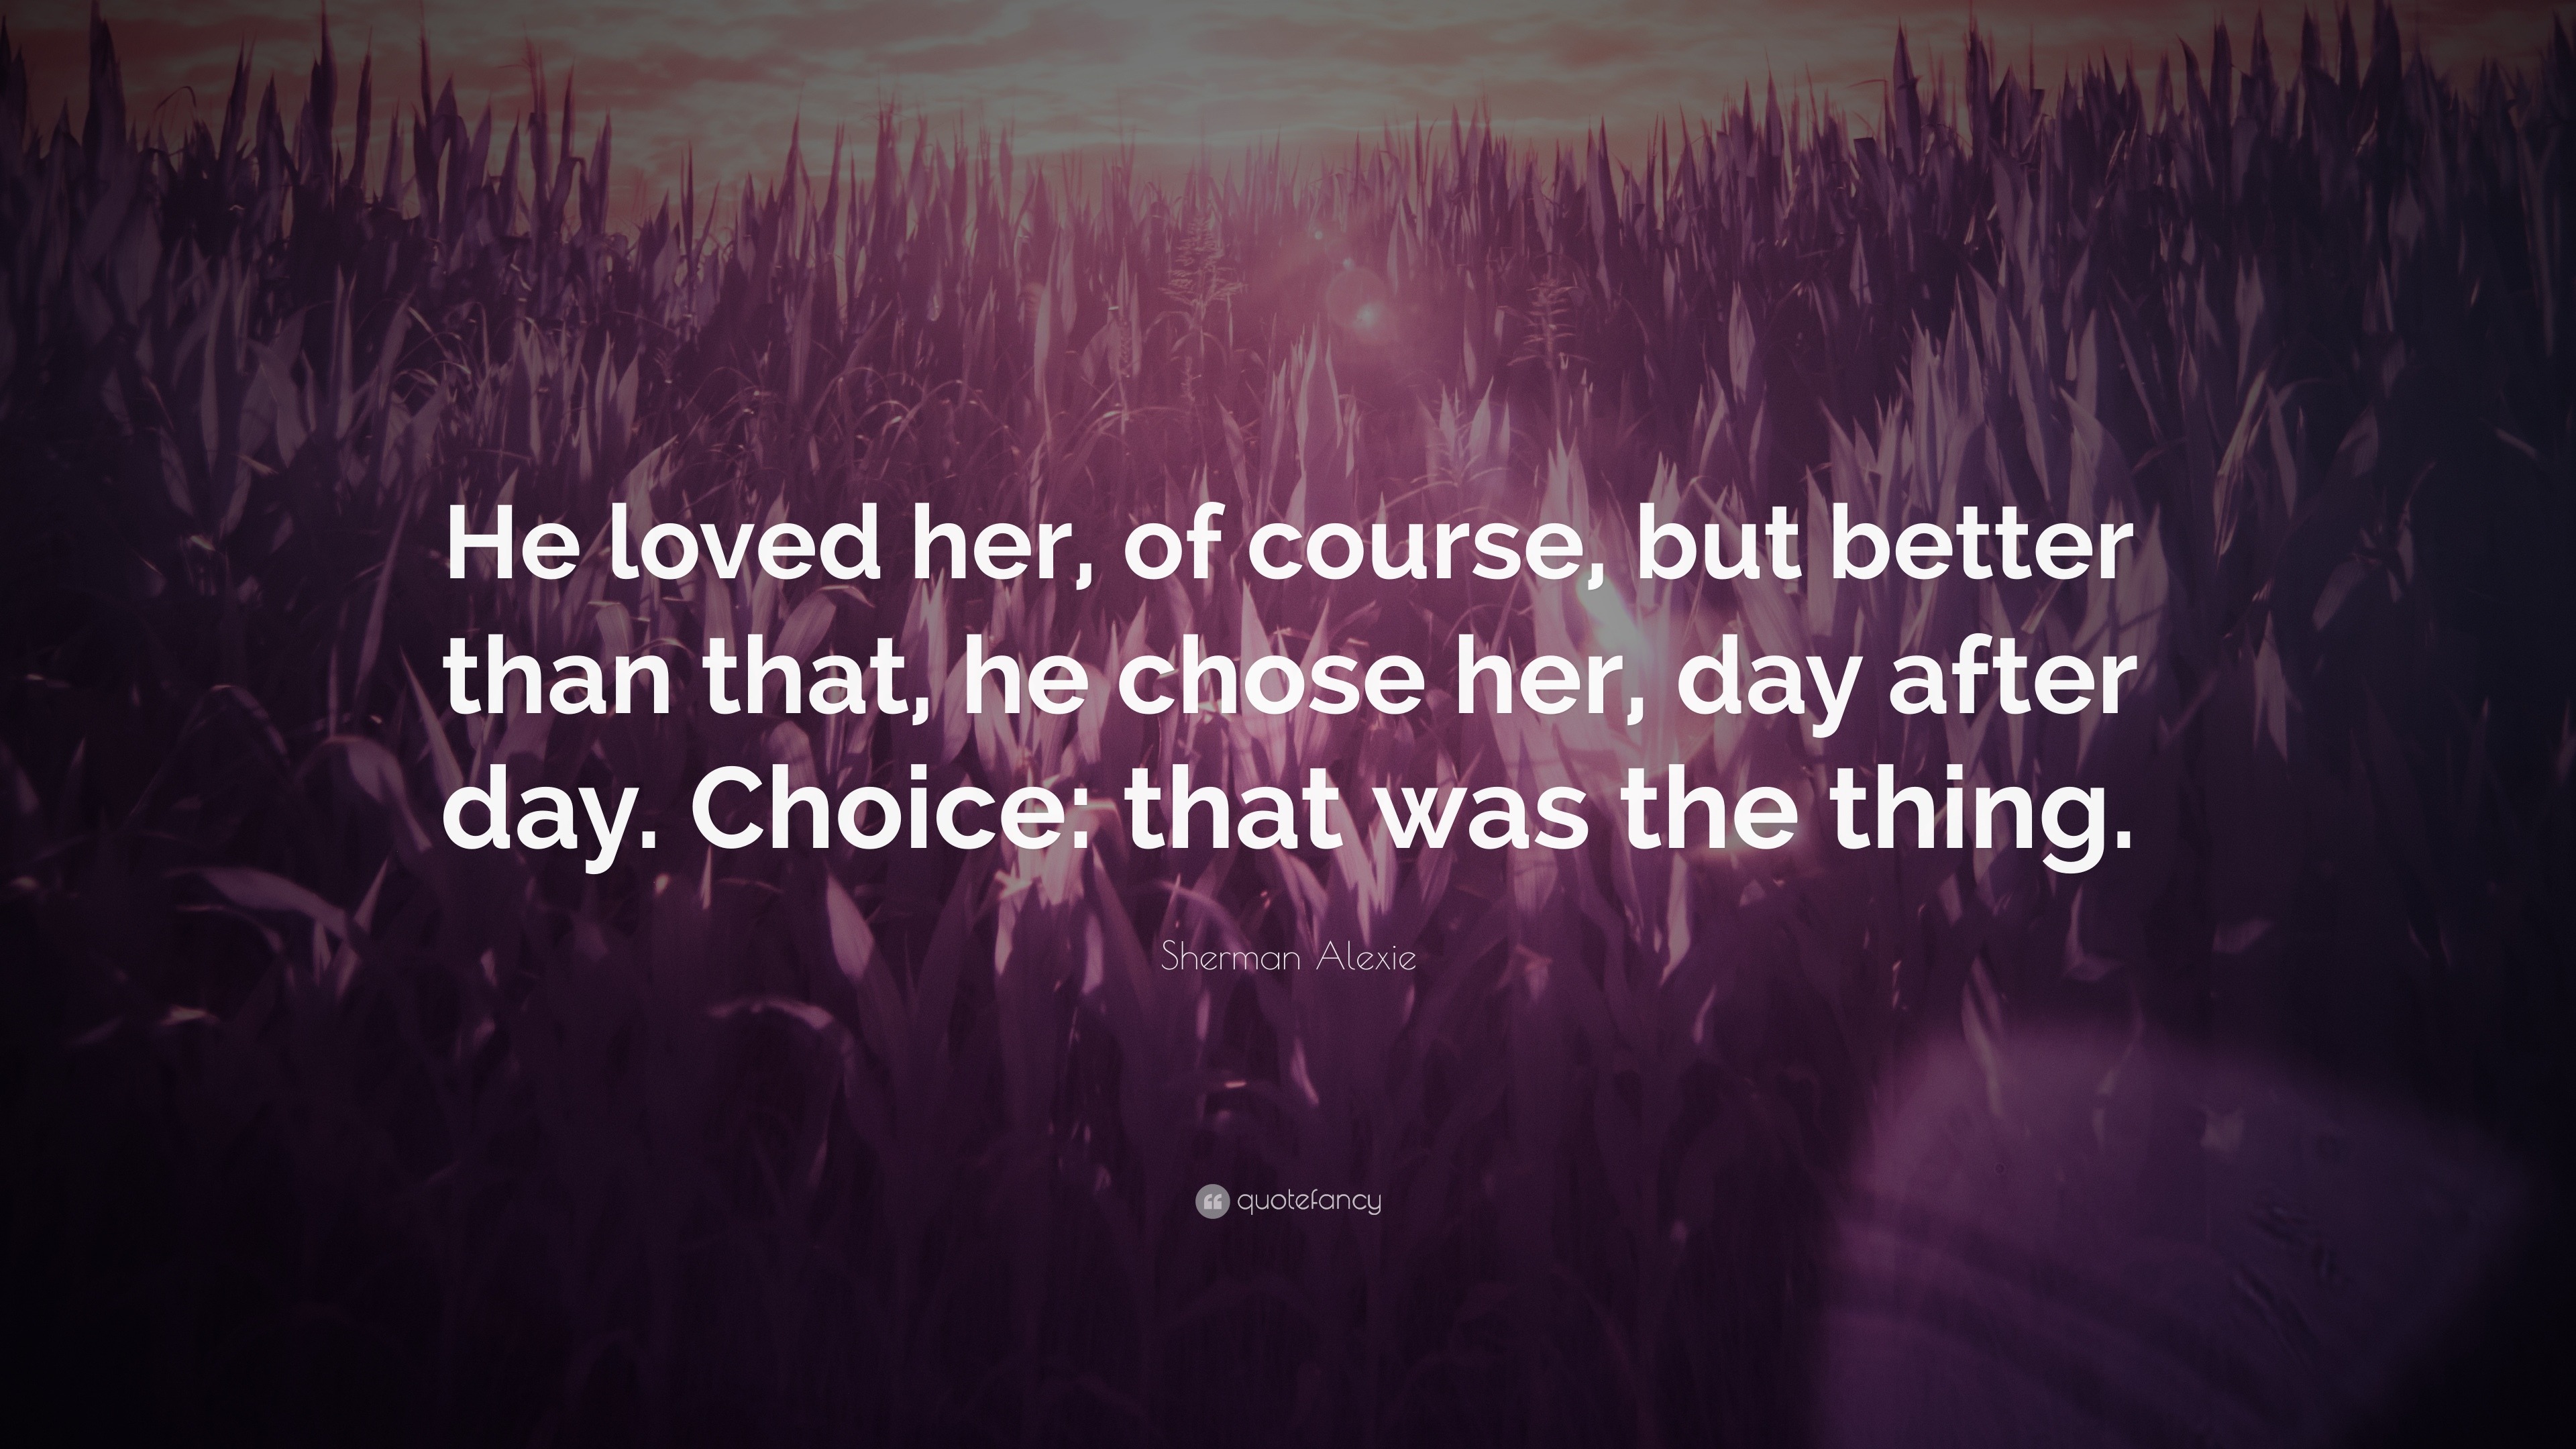 Sherman Alexie Quote: “He loved her, of course, but better than that ...